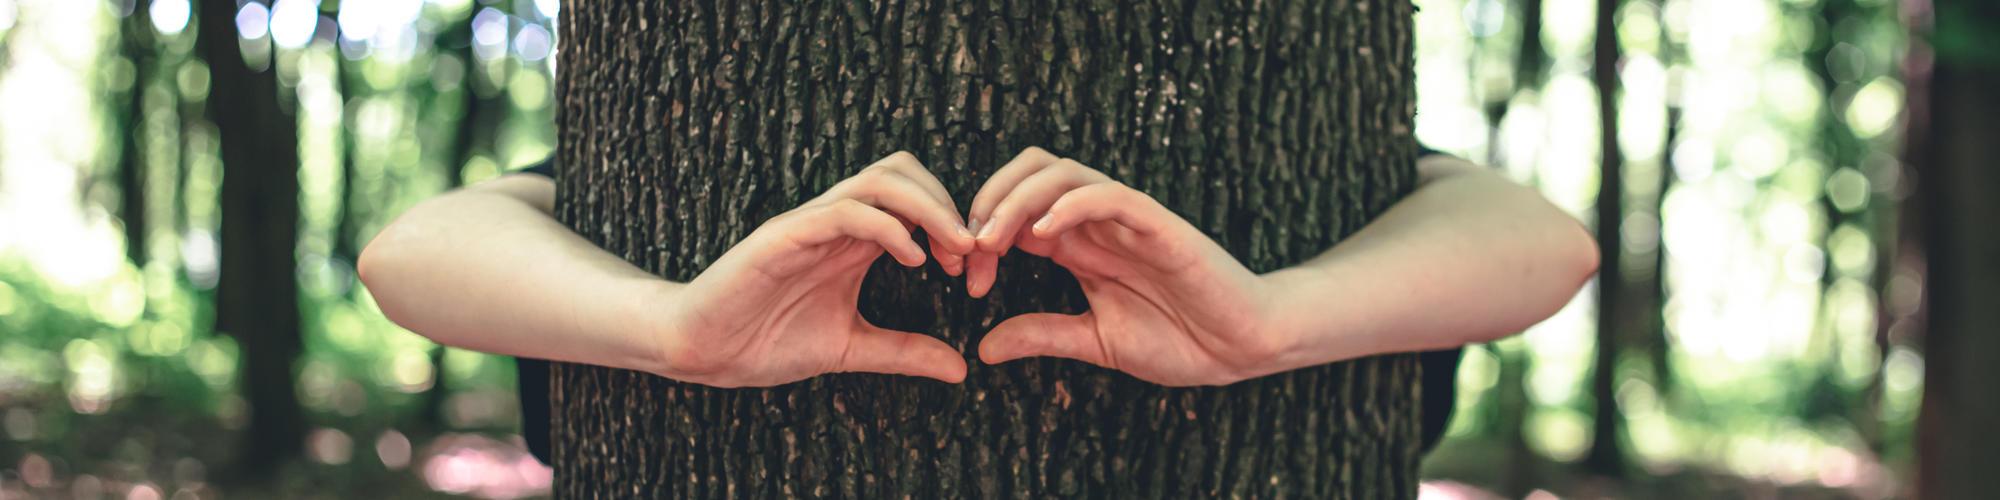 Woman’s hands hug a tree in the forest 